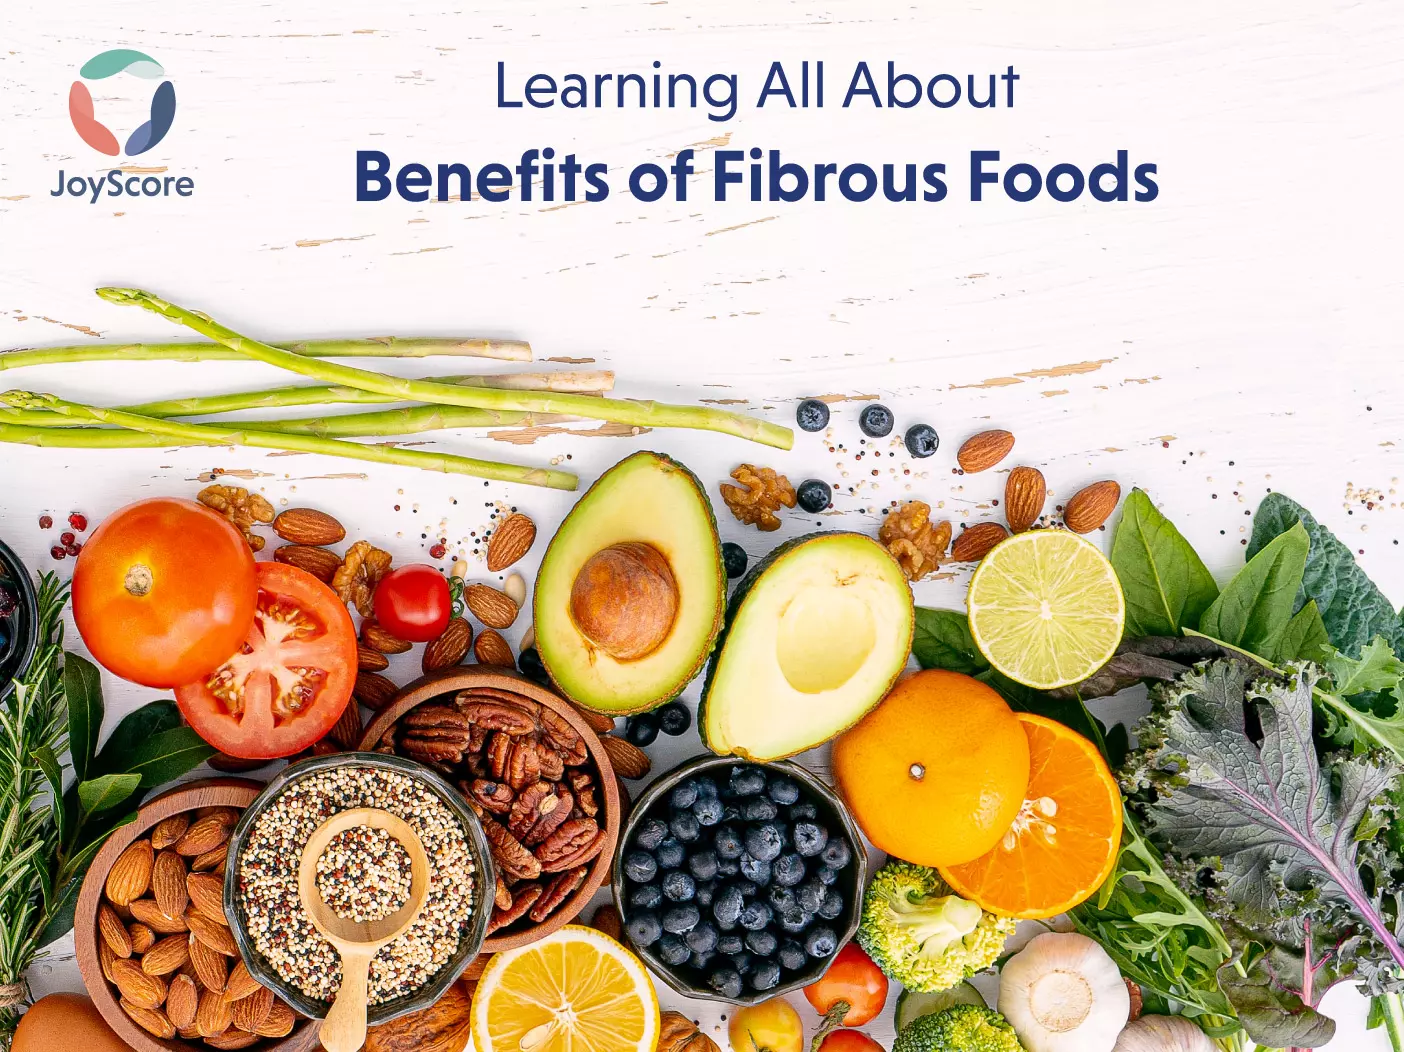 Learning about fibrous foods benefits